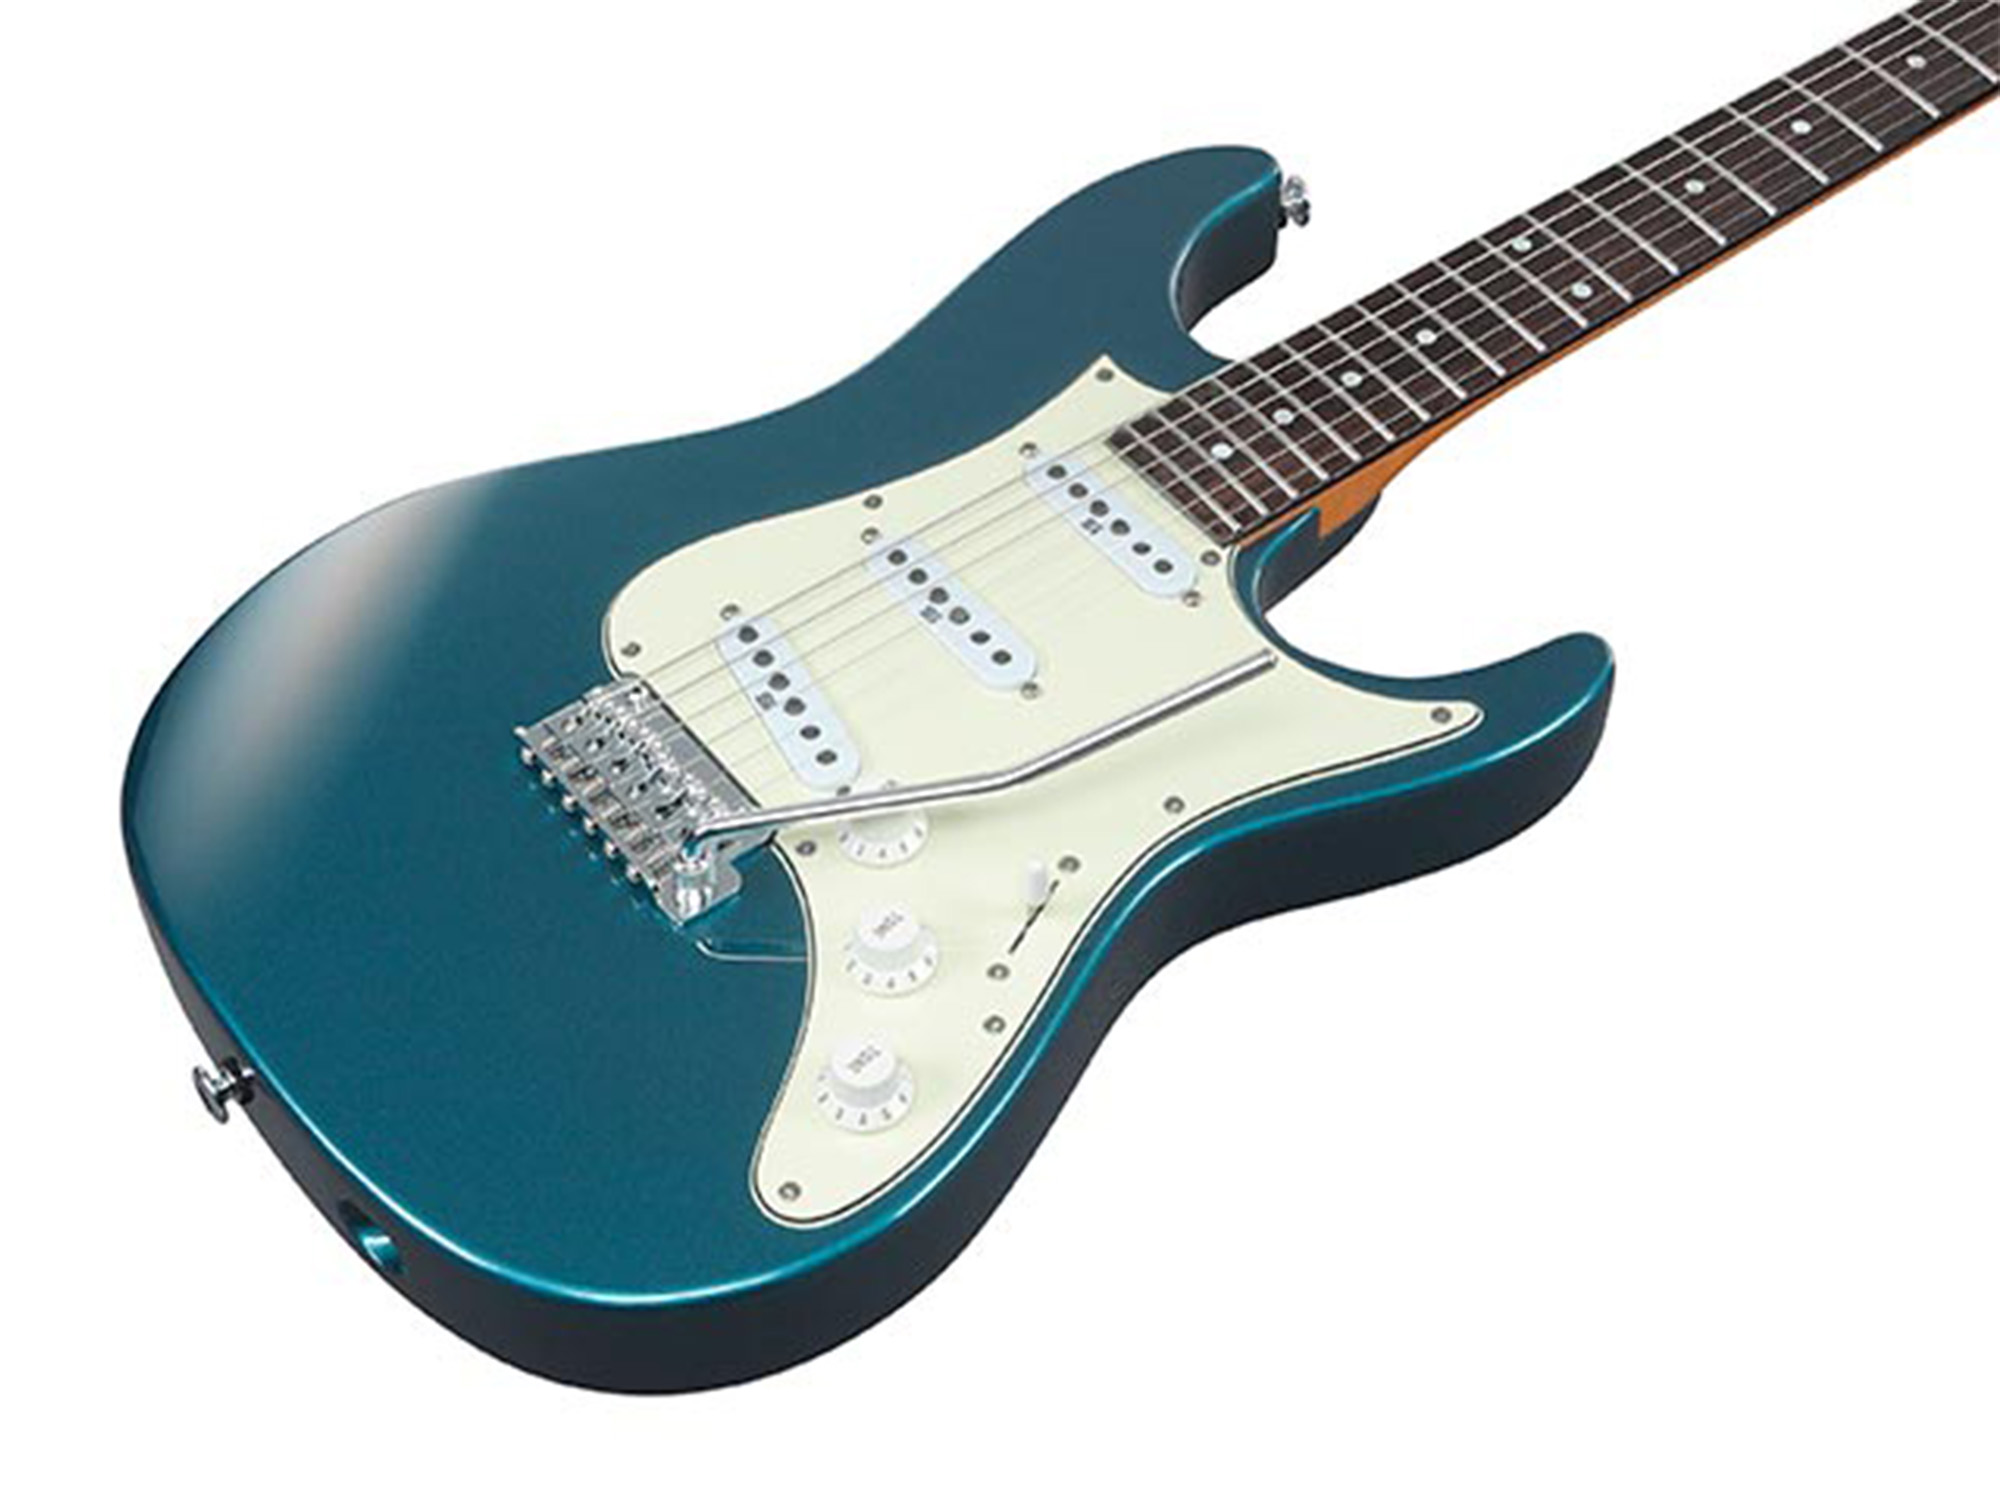 New Ibanez AZ2203N in Antique Turquoise